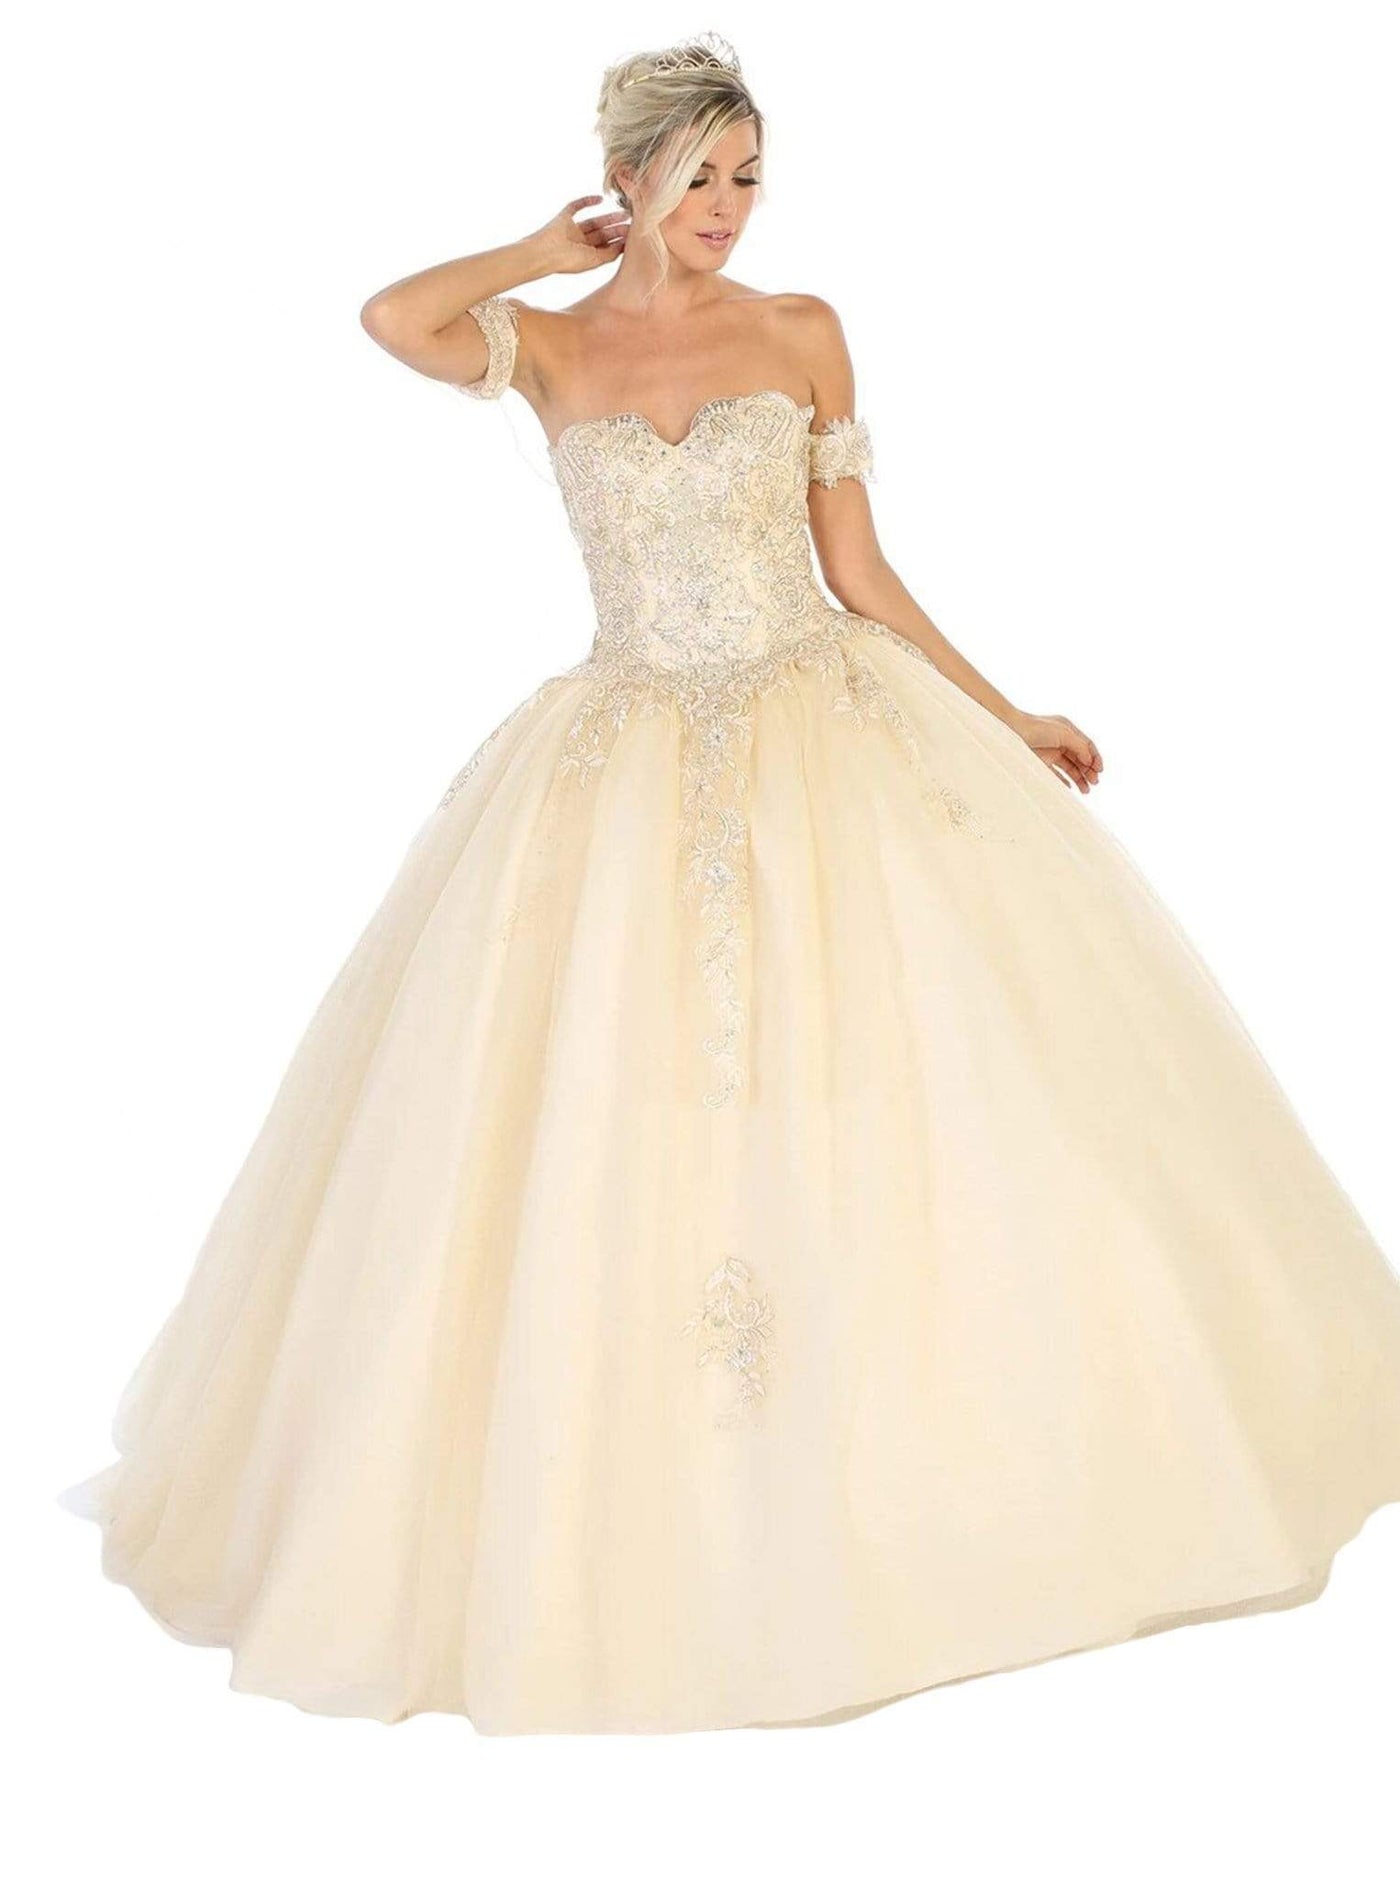 May Queen - LK129 Embellished Sweetheart Ballgown Special Occasion Dress 4 / Champagne